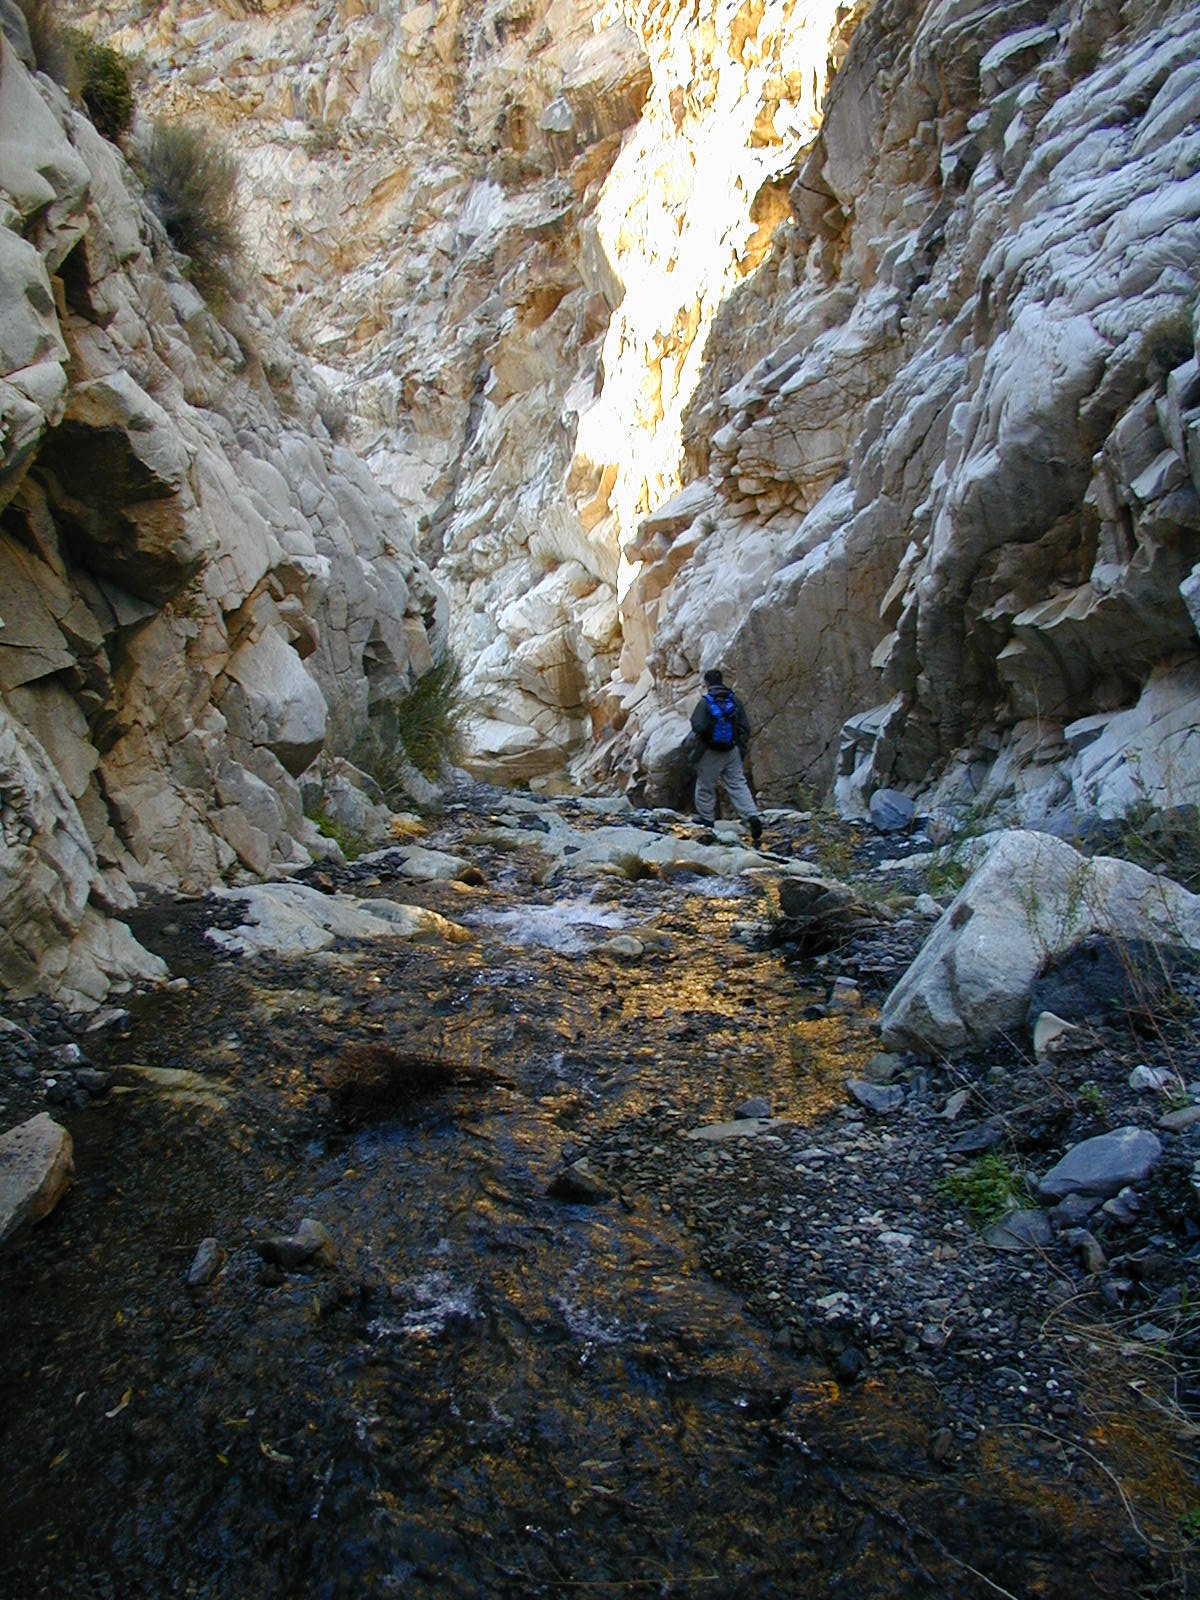 Photo of a hiker walking in Surprise Canyon Creek, in a narrow gorge with vertical canyon walls.